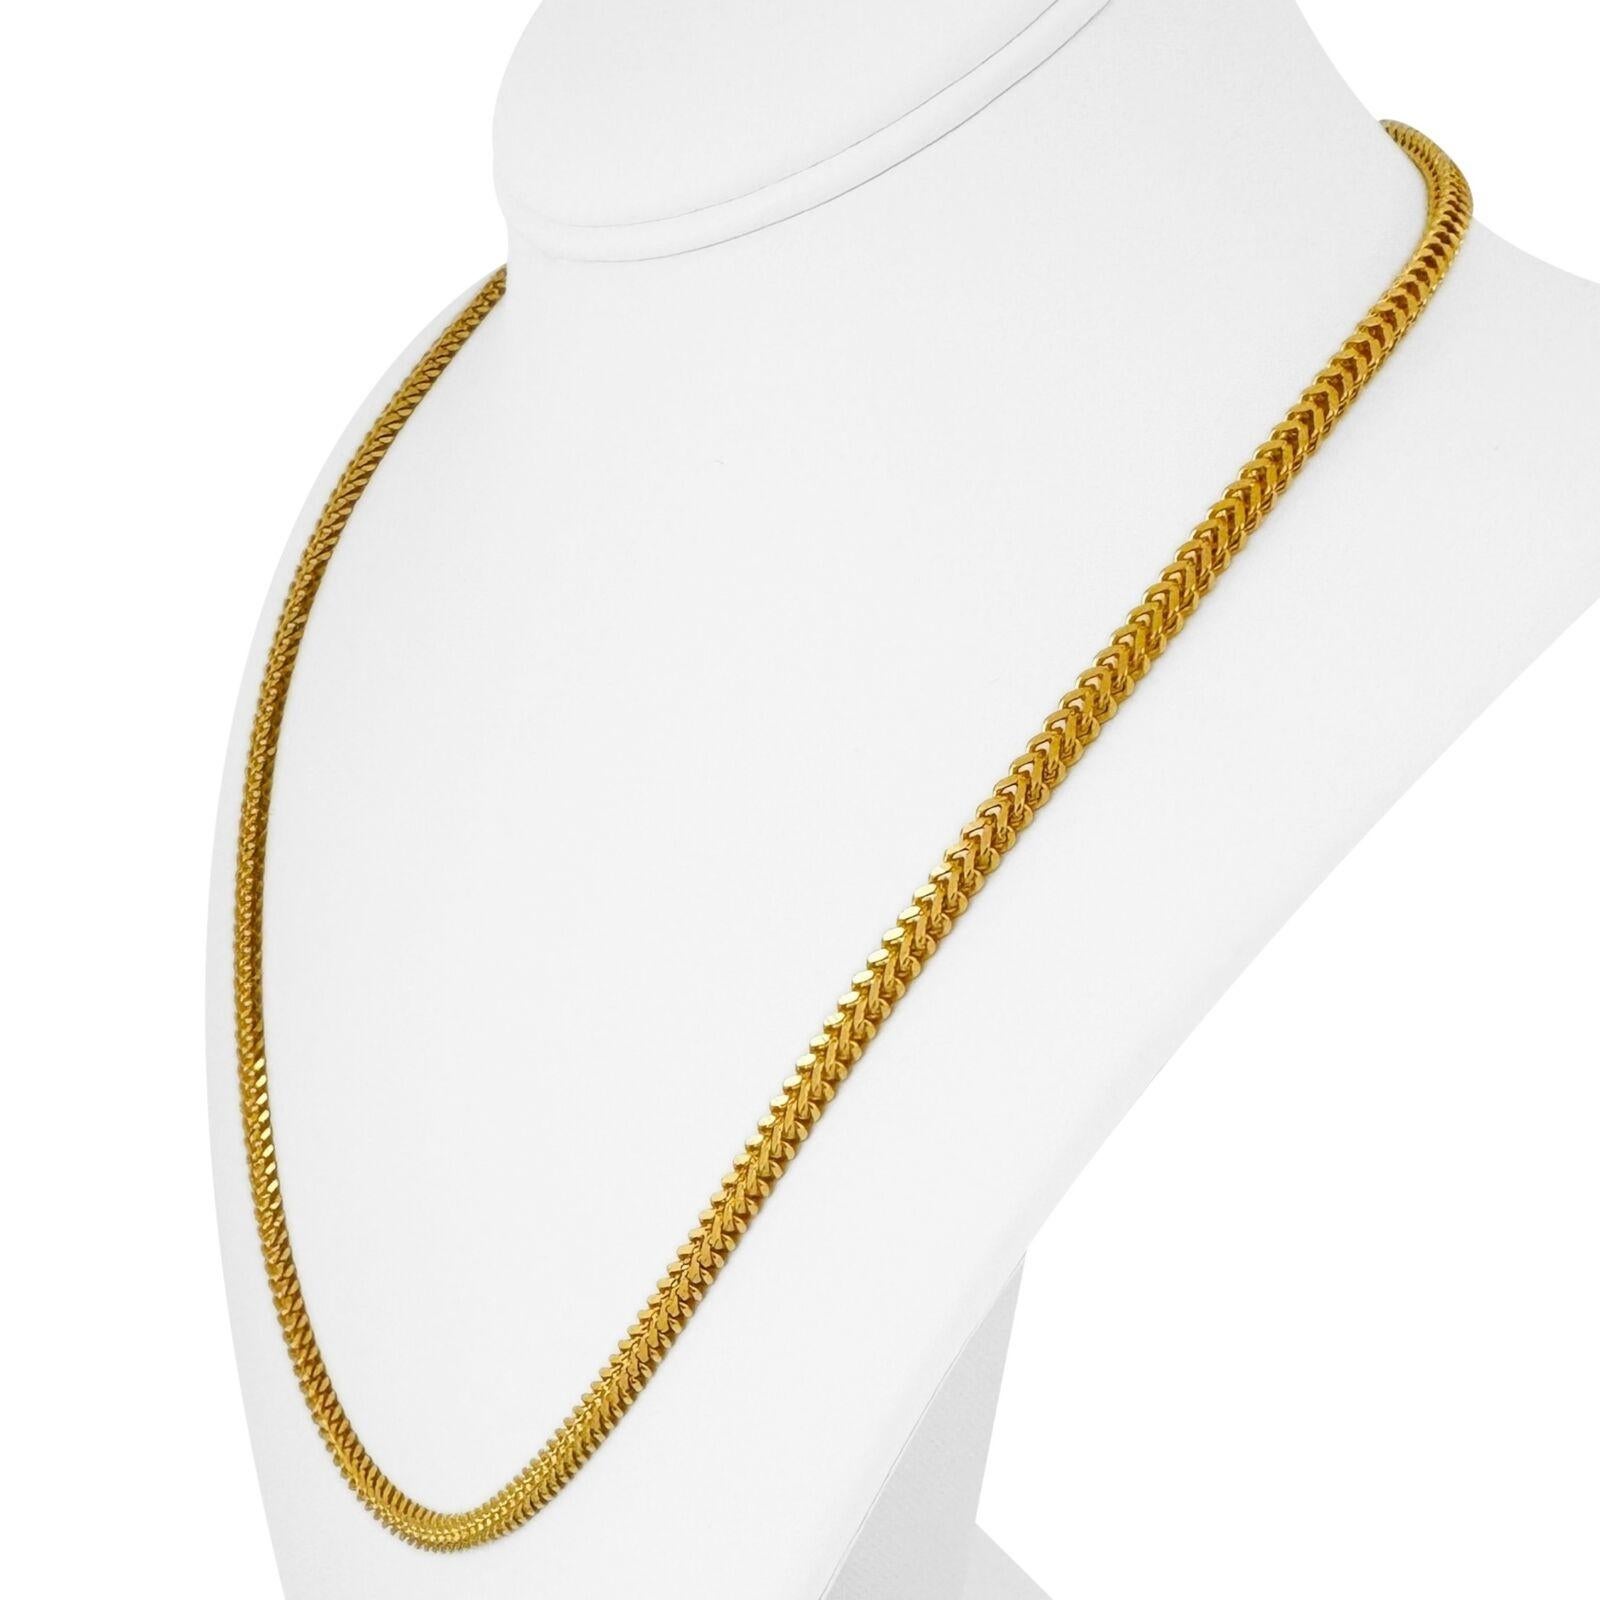 22k Yellow Gold 40.3g Solid Heavy 3.5mm Squared Franco Link Chain Necklace 22